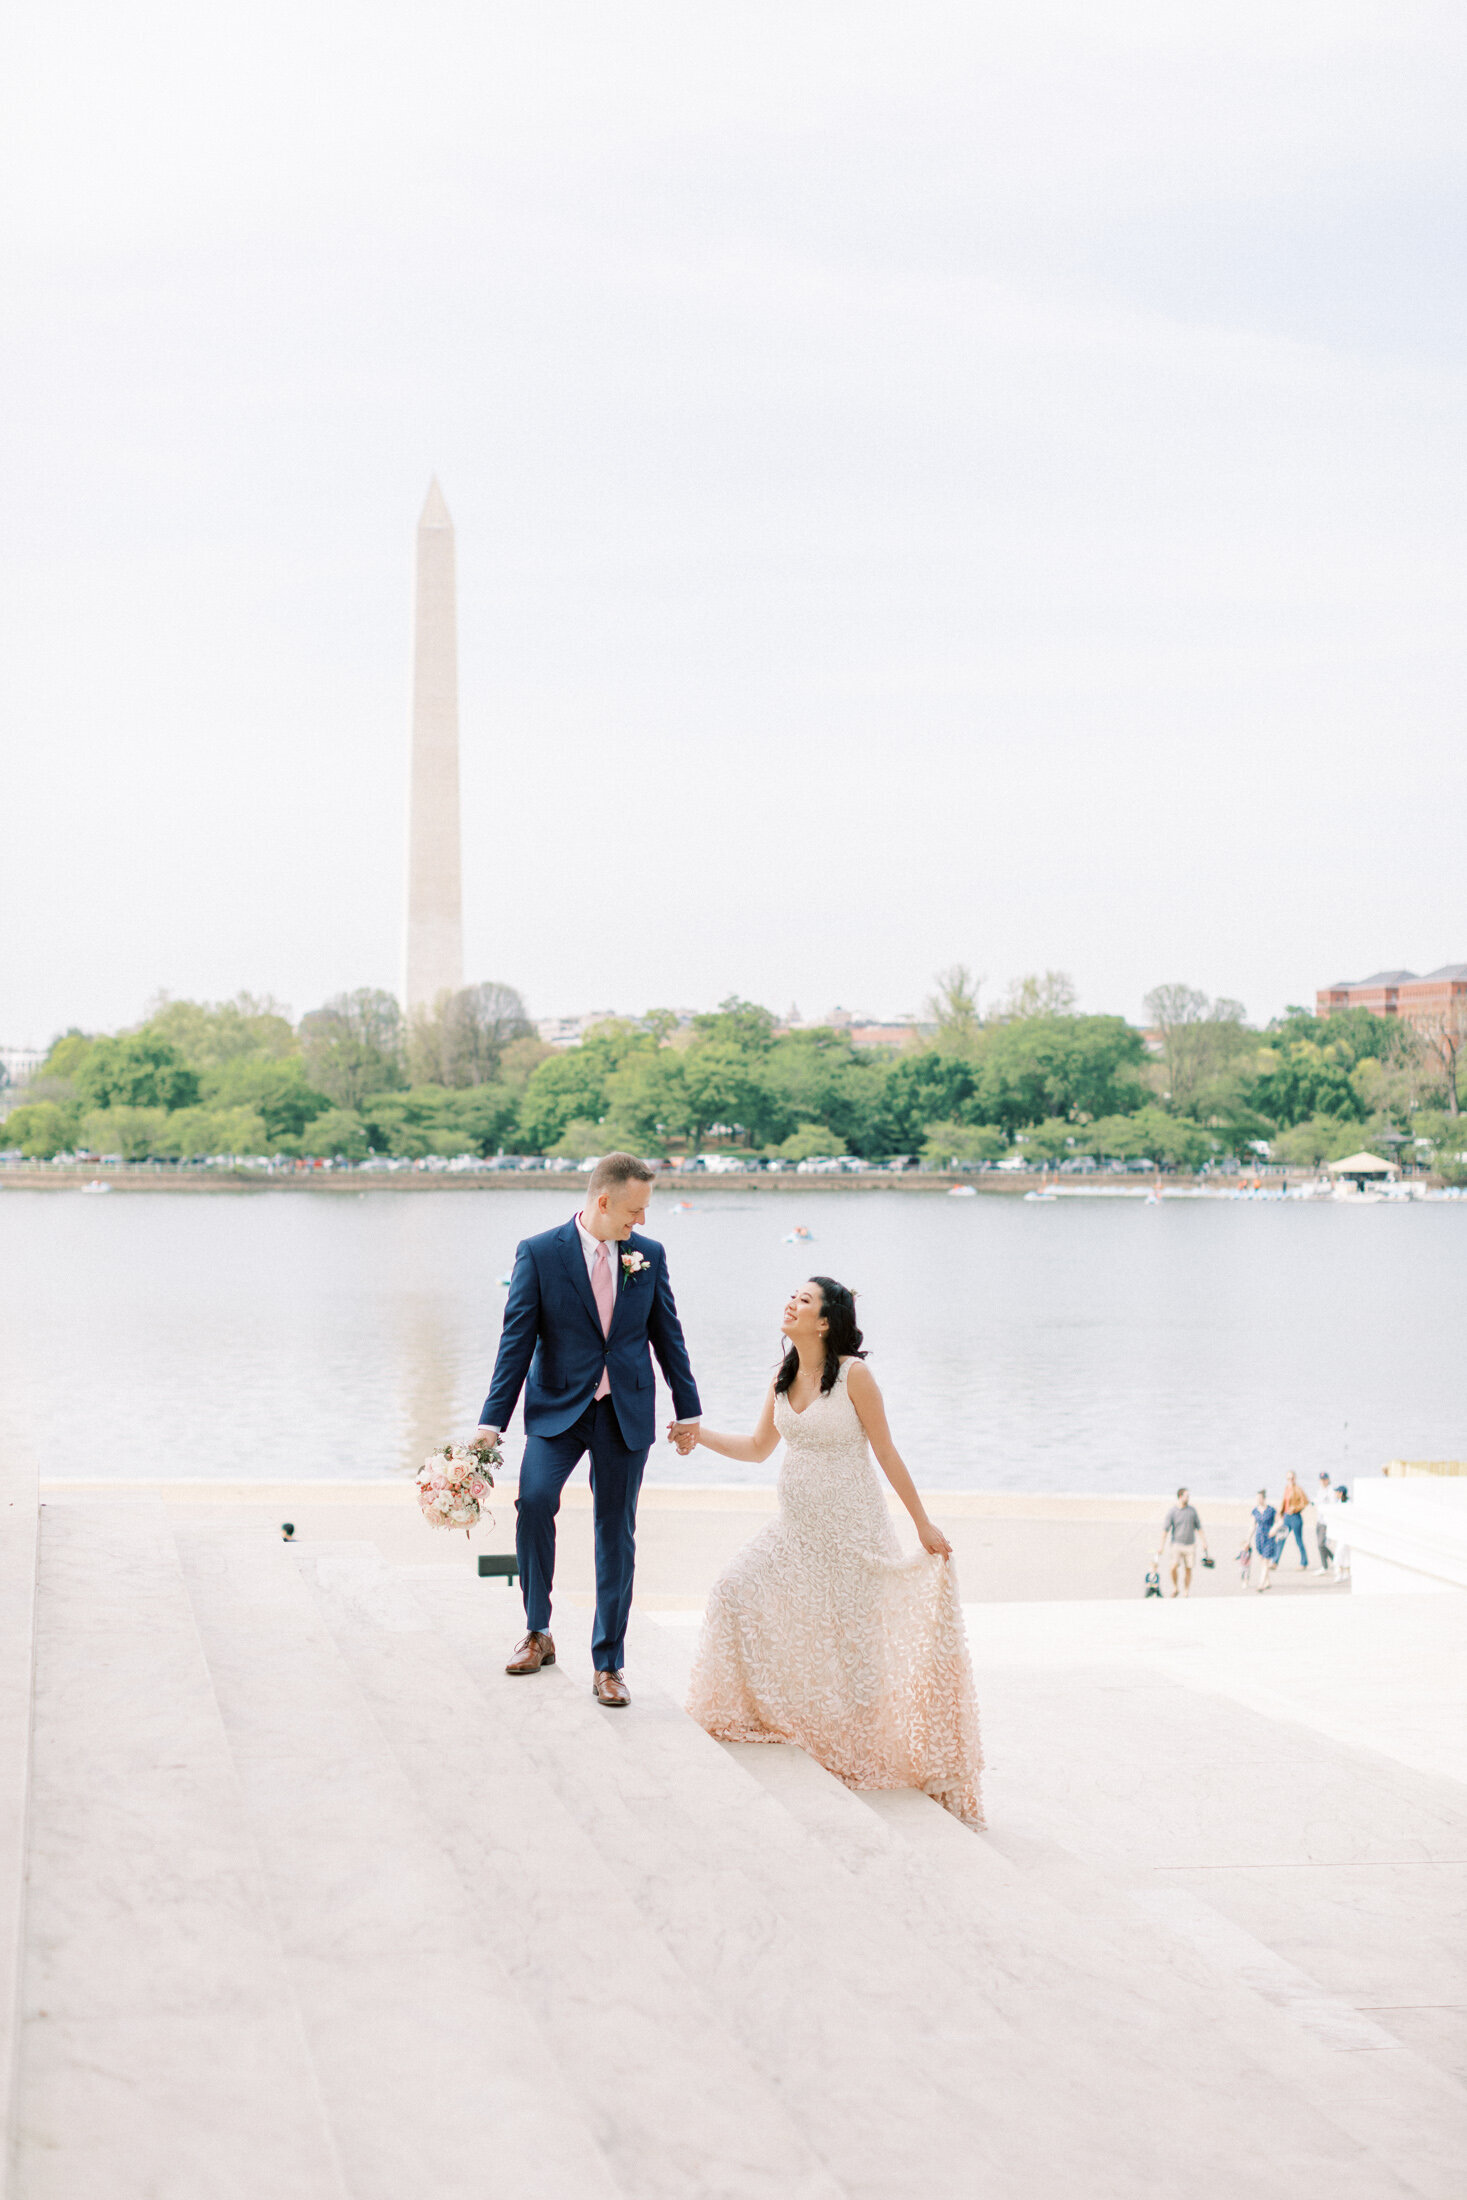 Couple walk up the stairs with the Washington Monument behind them